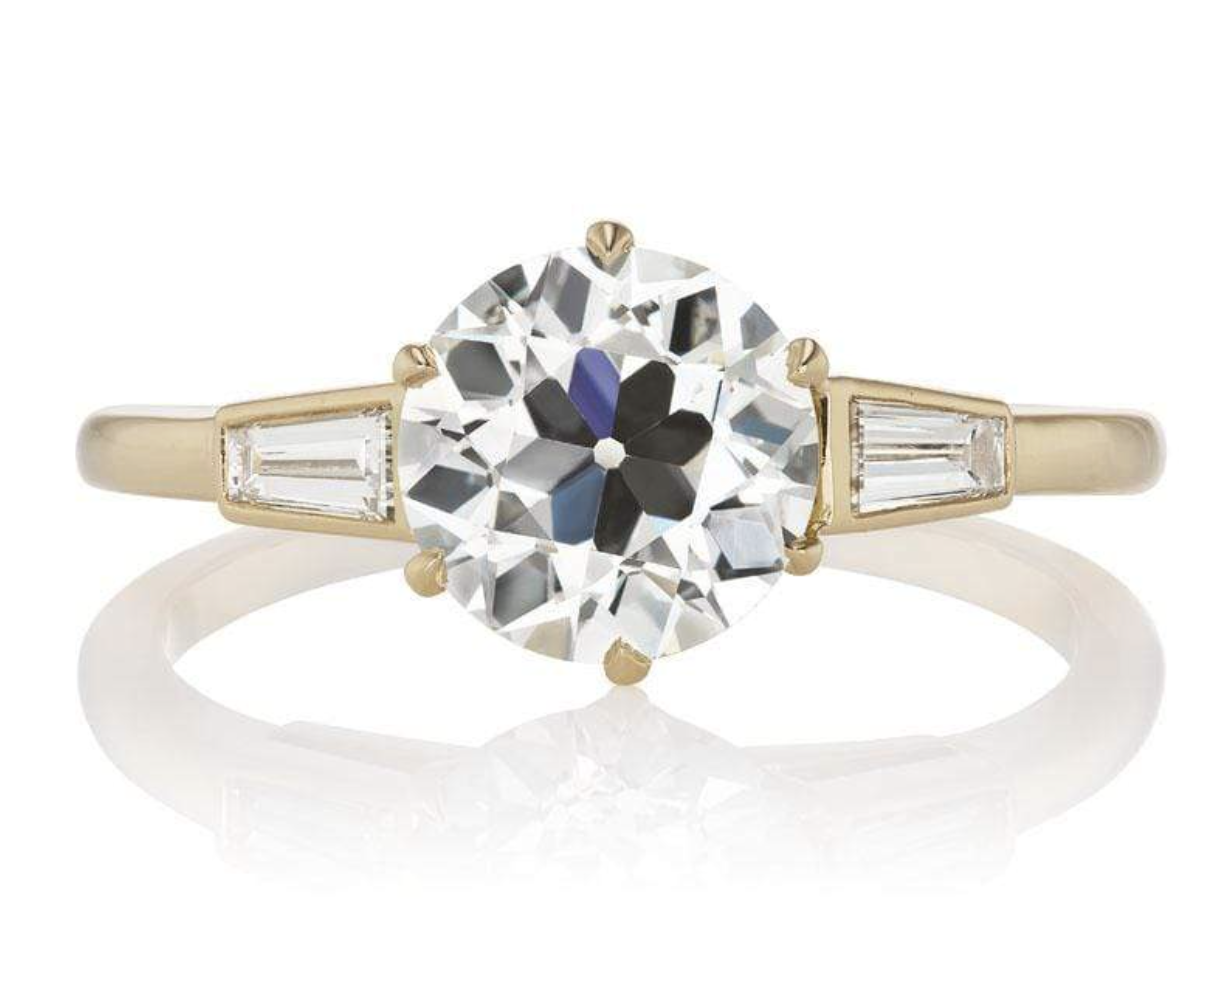 TAPERED BAGUETTE STYLE 1.62 CT DIAMOND RING